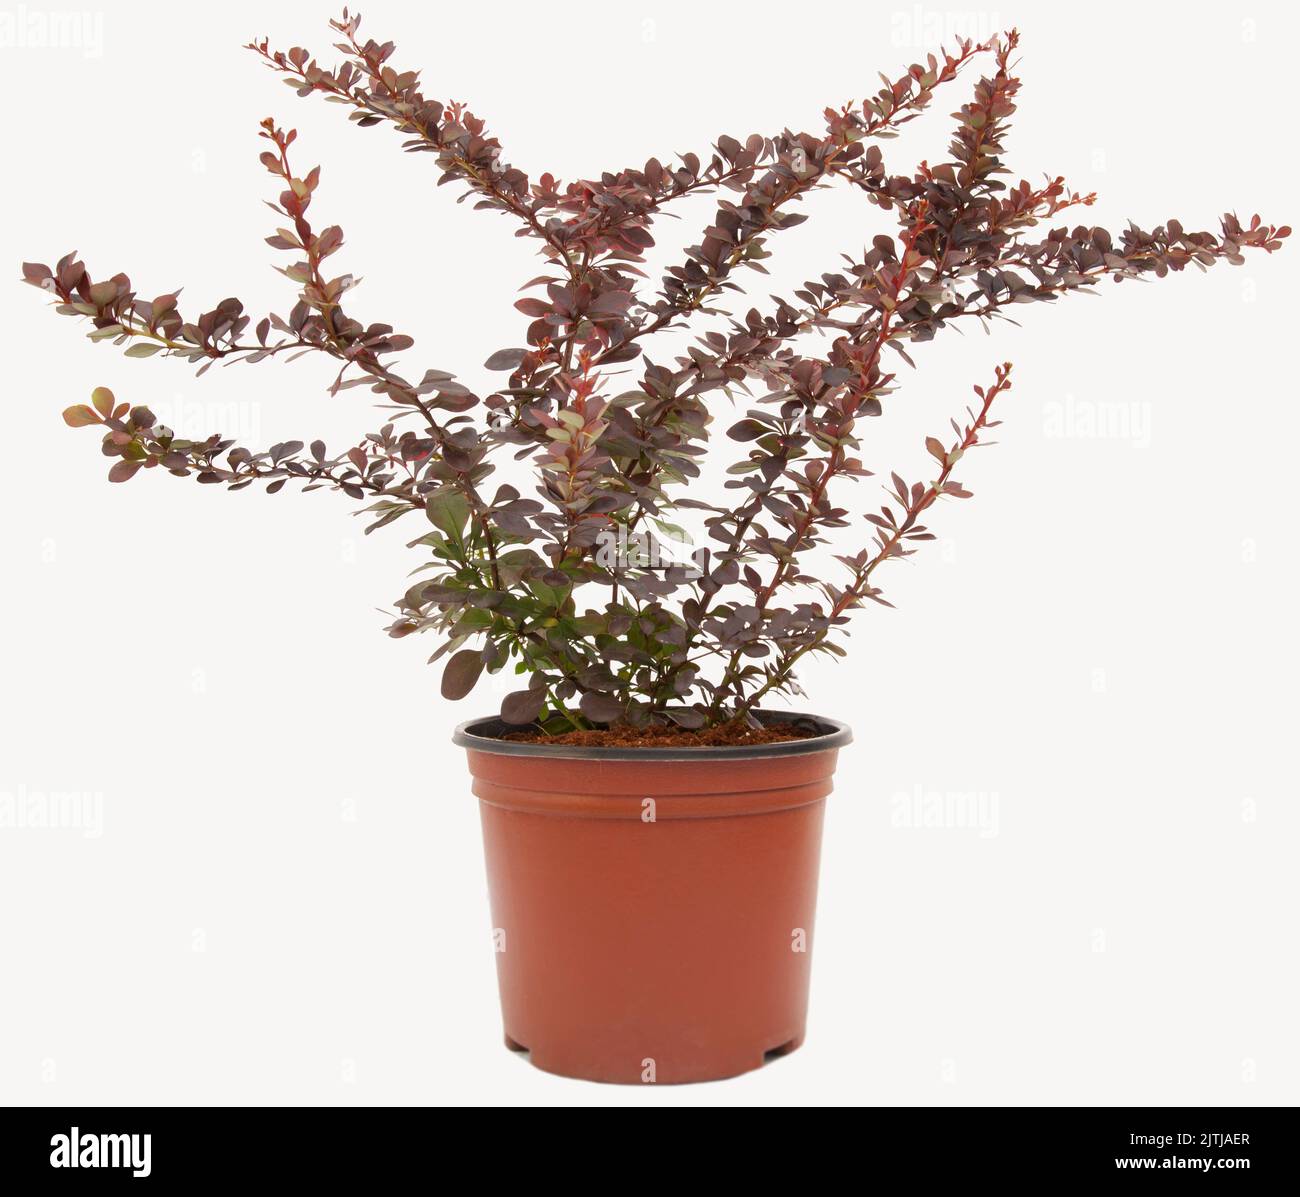 Balur berberis plant in tile-colored flowerpot on isolated white background, selective focus shot. Stock Photo